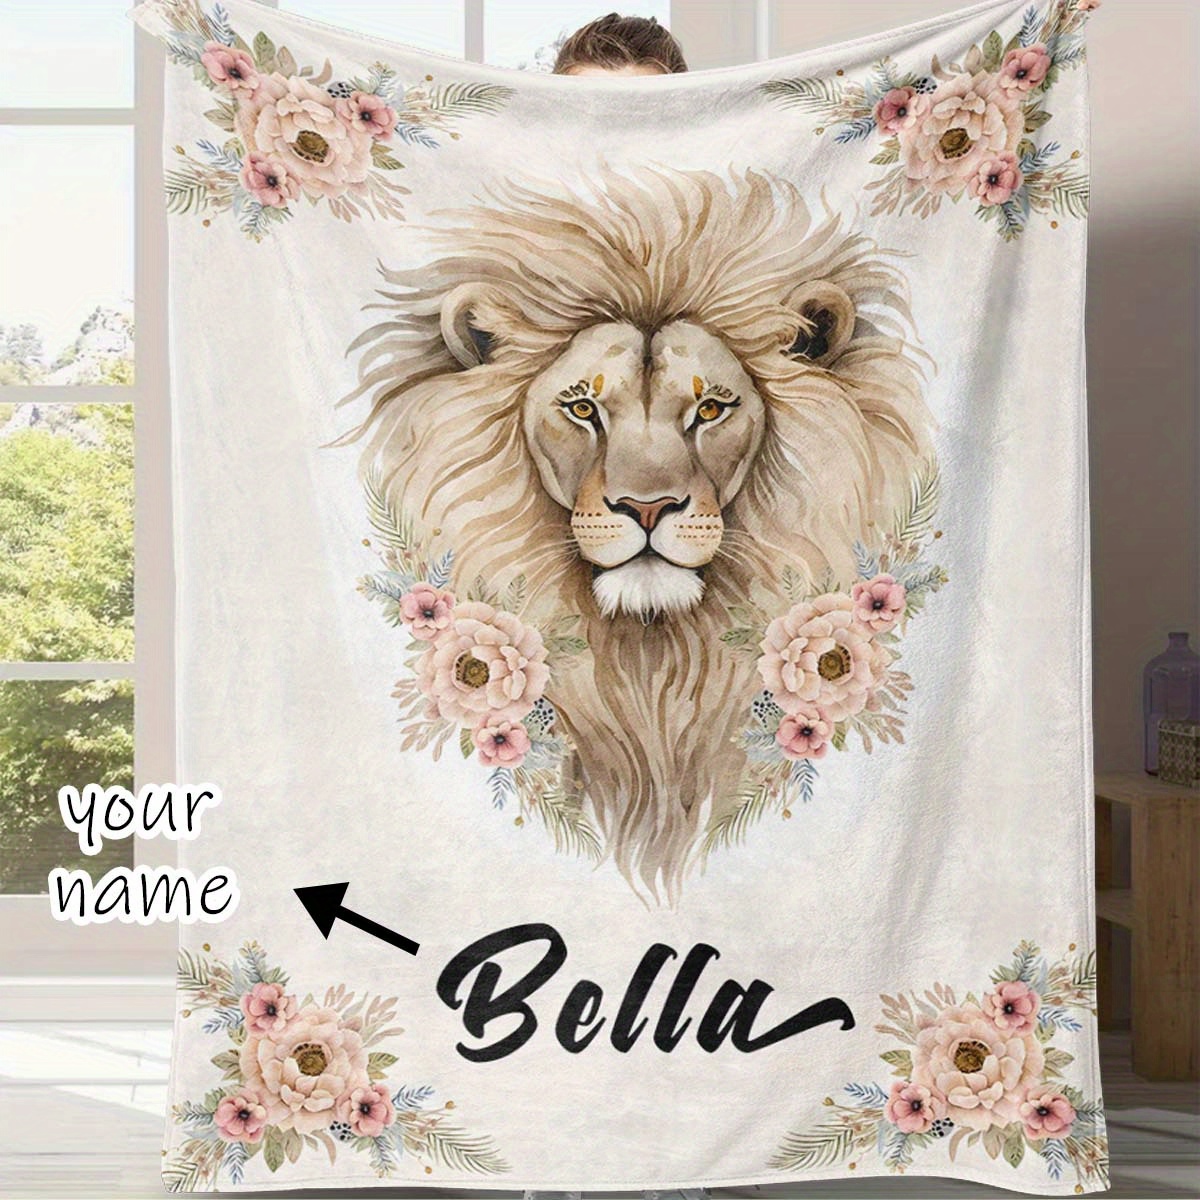 

Customized Name Blanket, Lion And Flower Blanket For Birthday Gift Holiday Gift, Soft 4 Seasons Flannel Outdoor Blanket